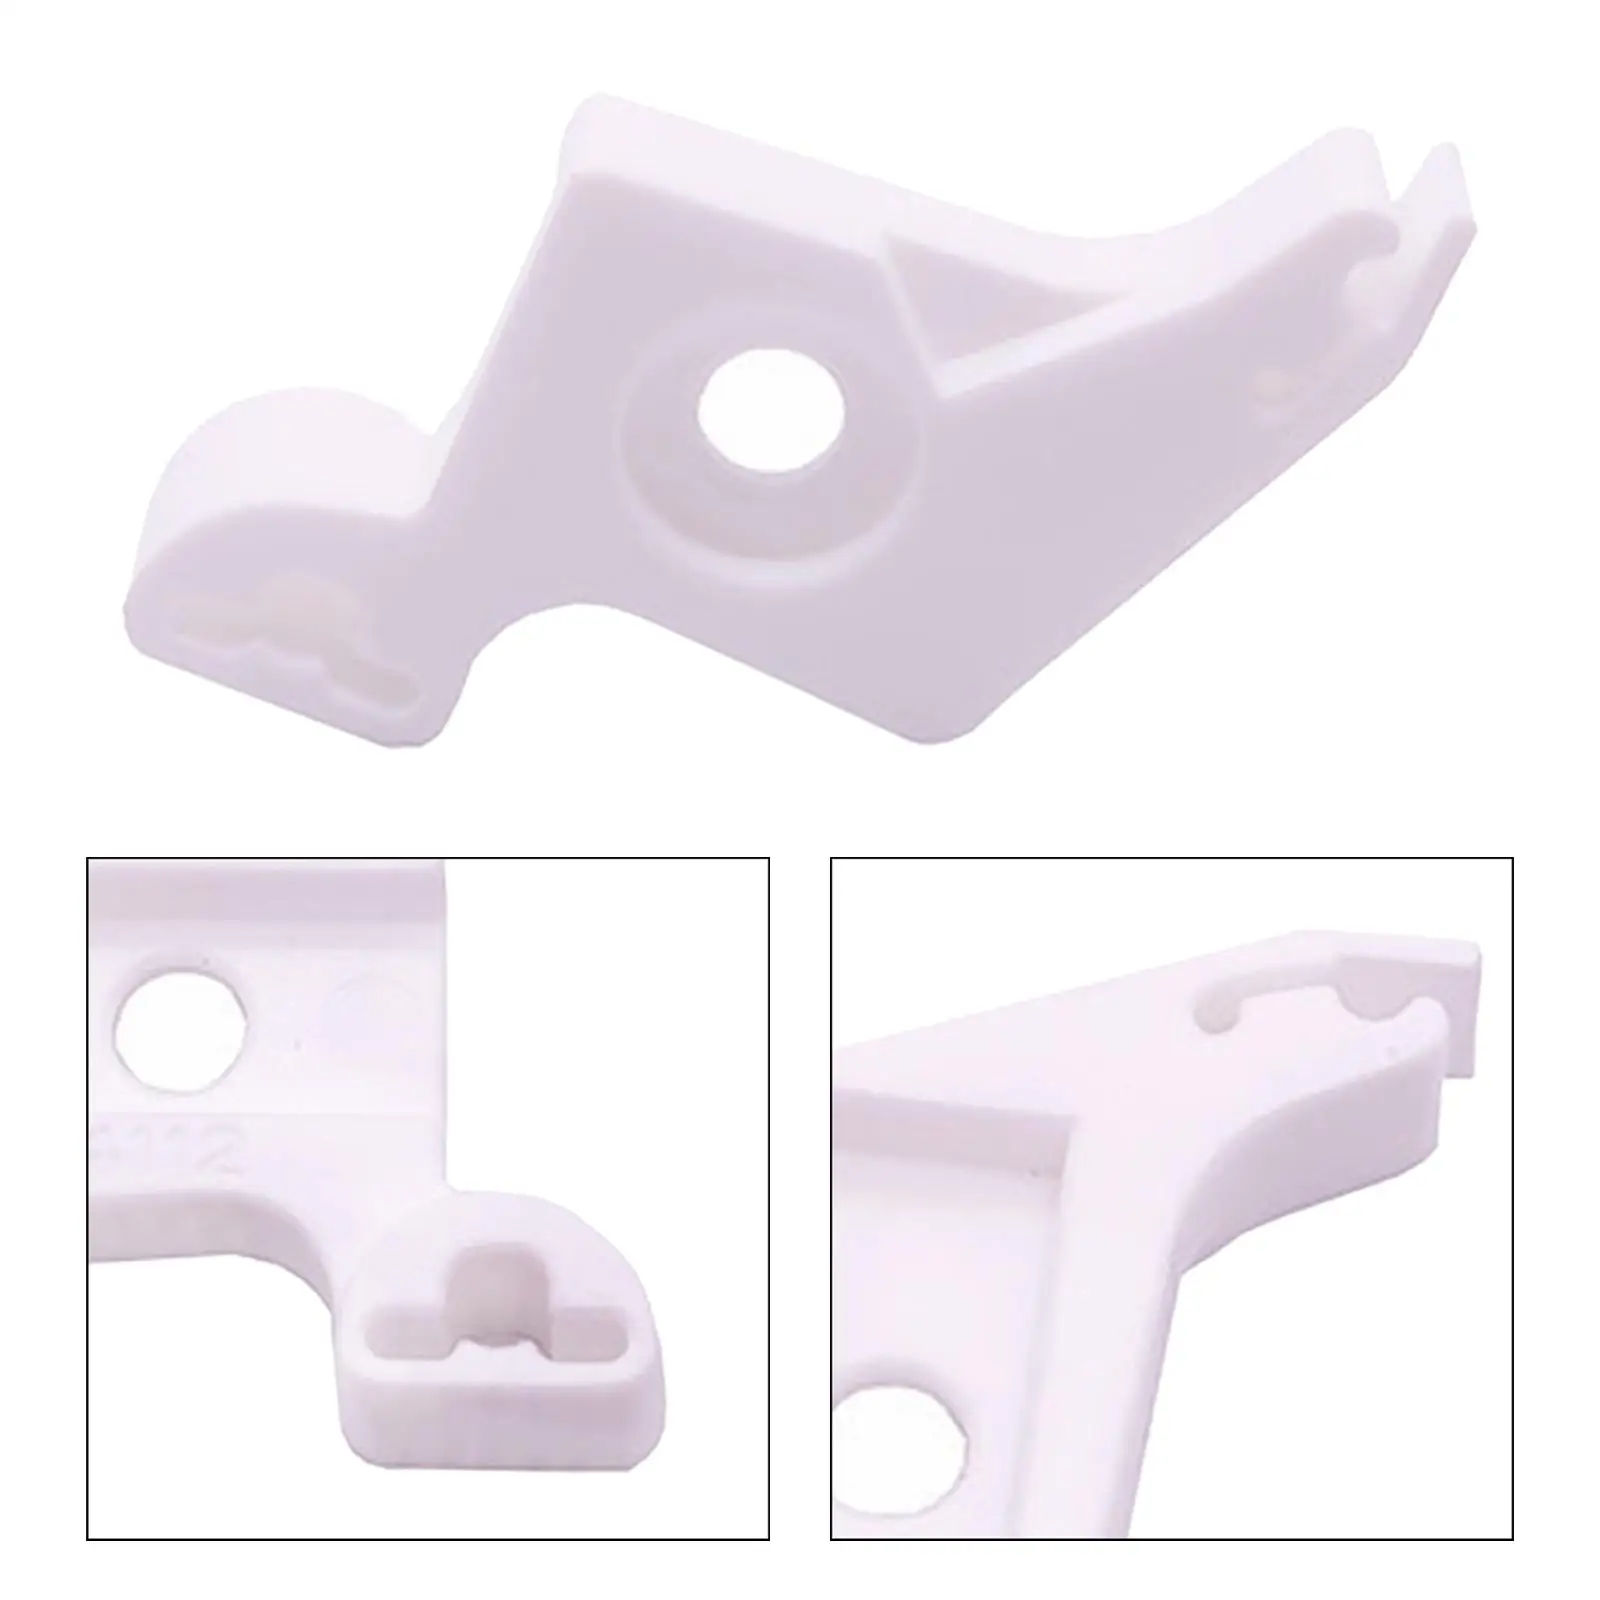 Presser Foot Holder Low Shank Sewing Machine Adapter Industrial Universal Useful for Cloth Darning Overlock Quilting Overstitch